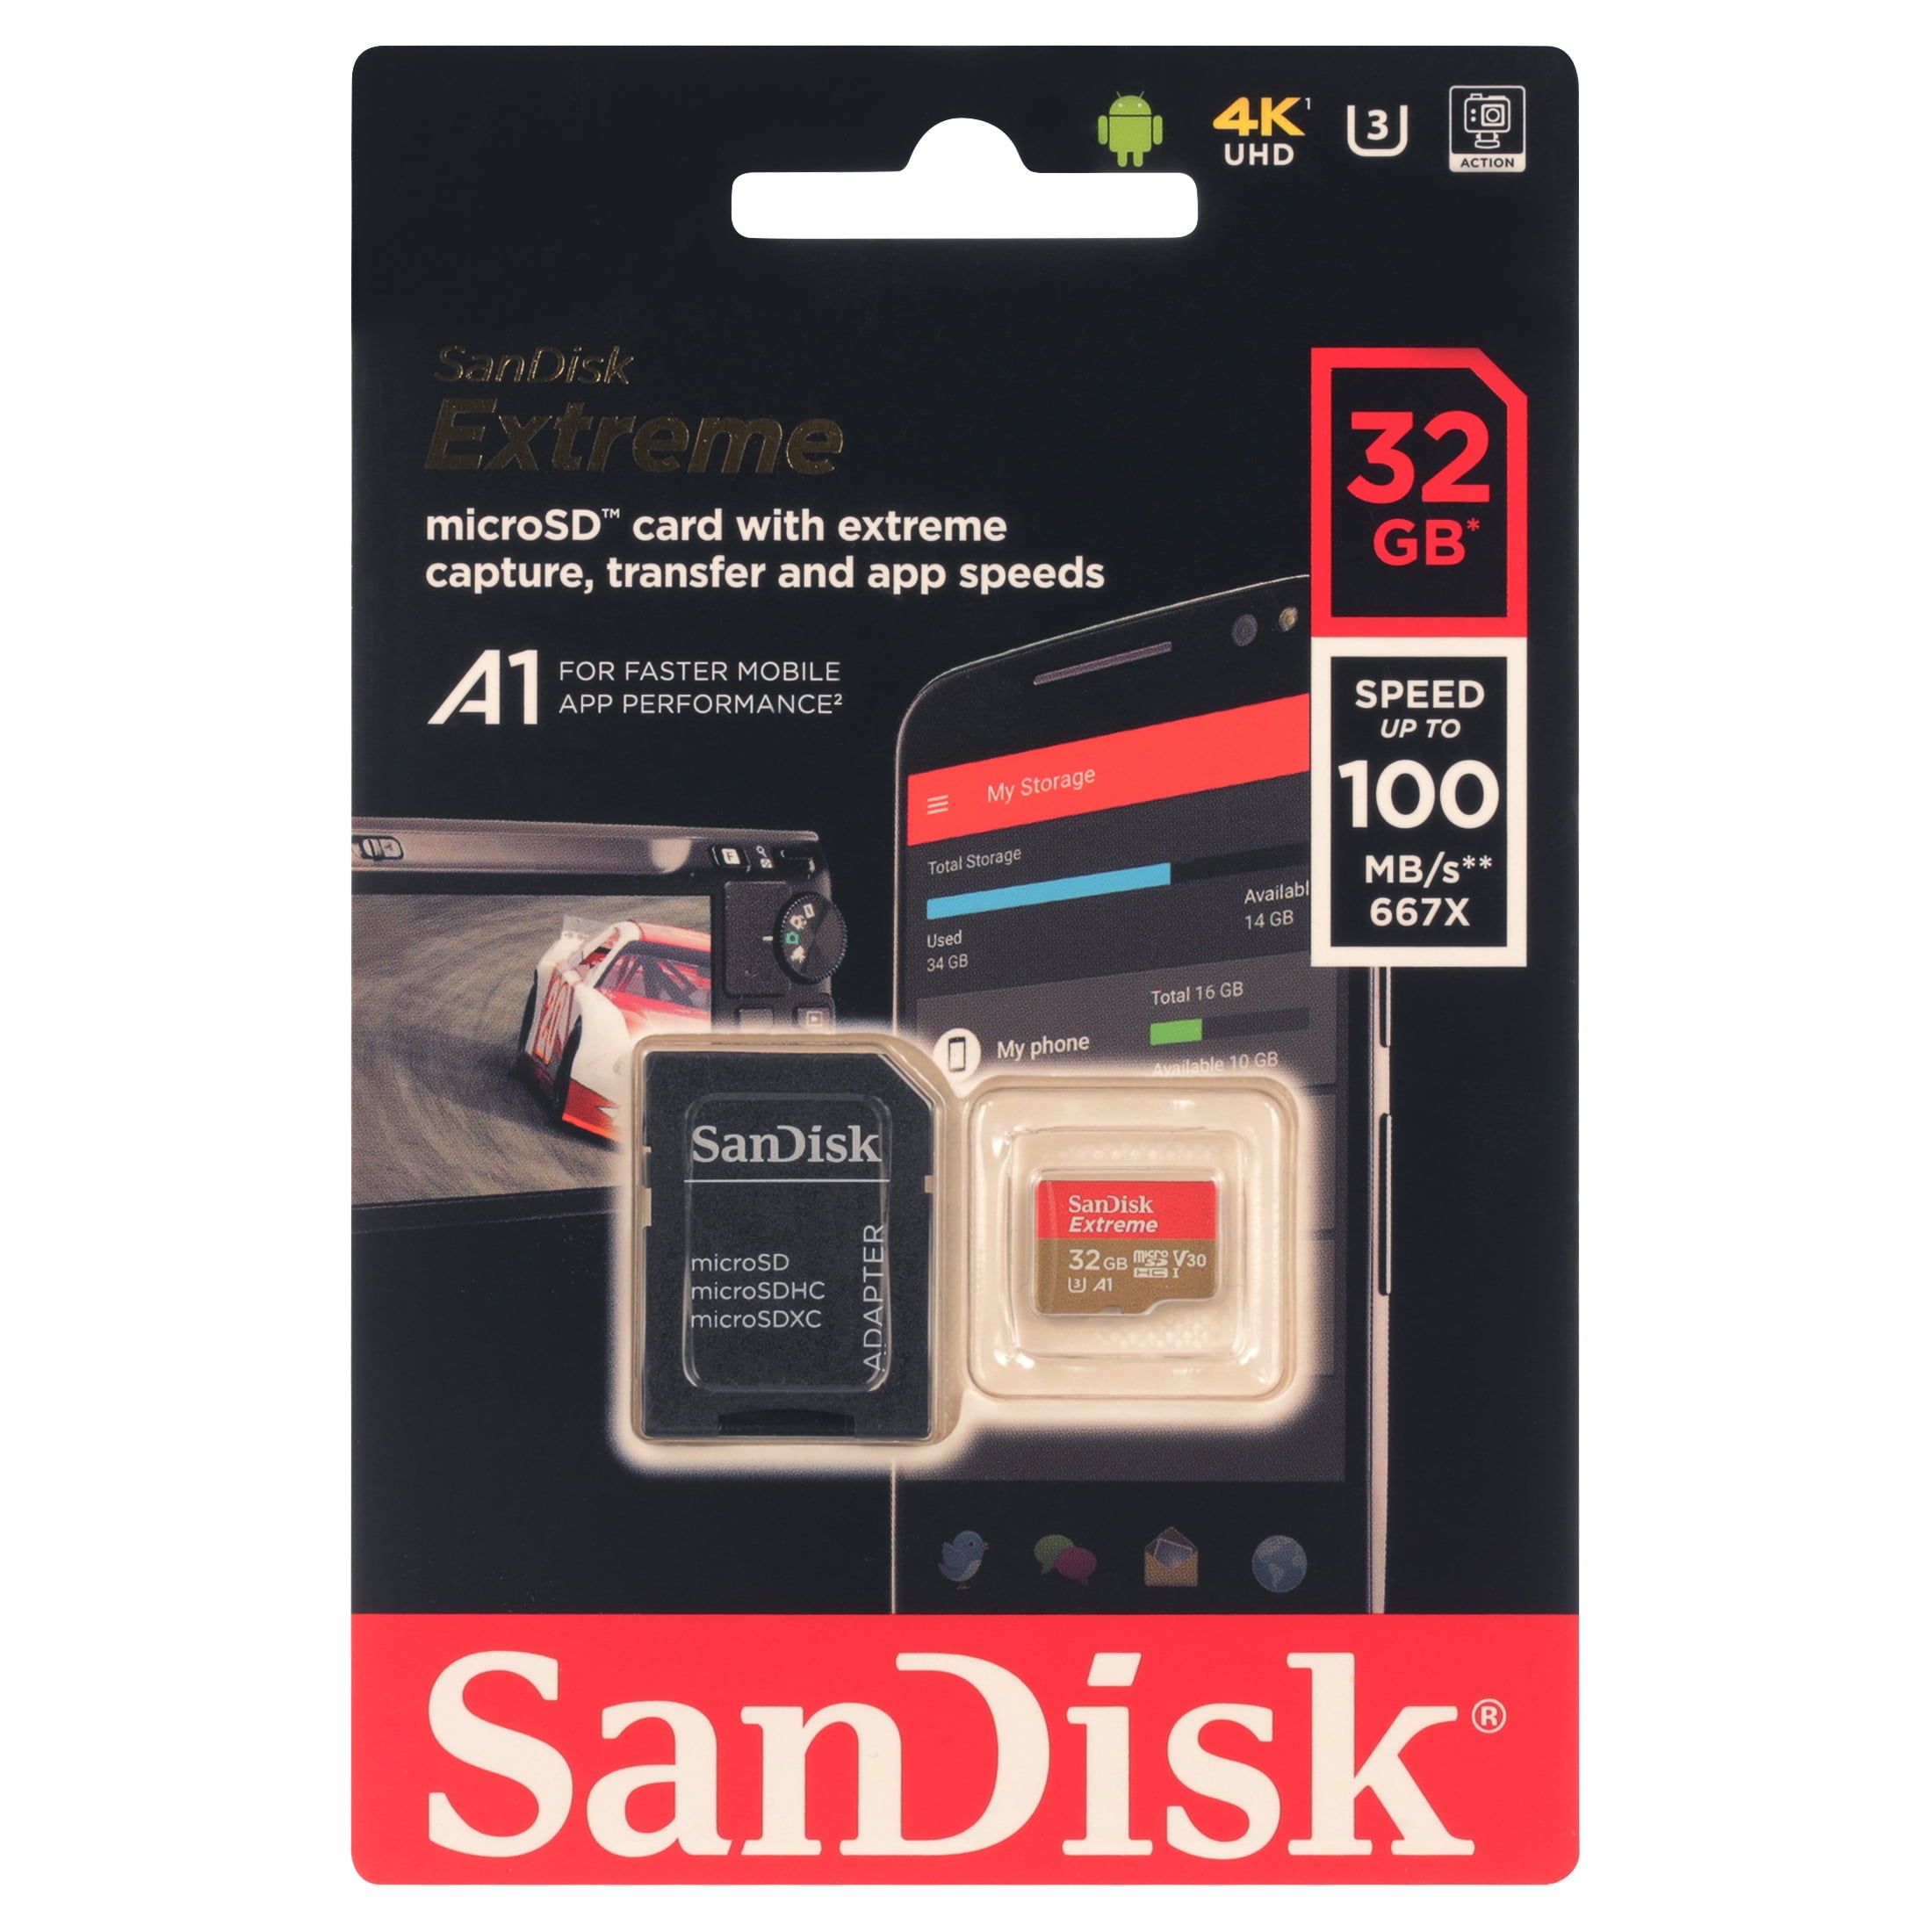 SanDisk Ultra 64GB microSDXC UHS-I Card with Adapter, Grey/Red, Standard  Packaging (SDSQUNC-064G-GN6MA)